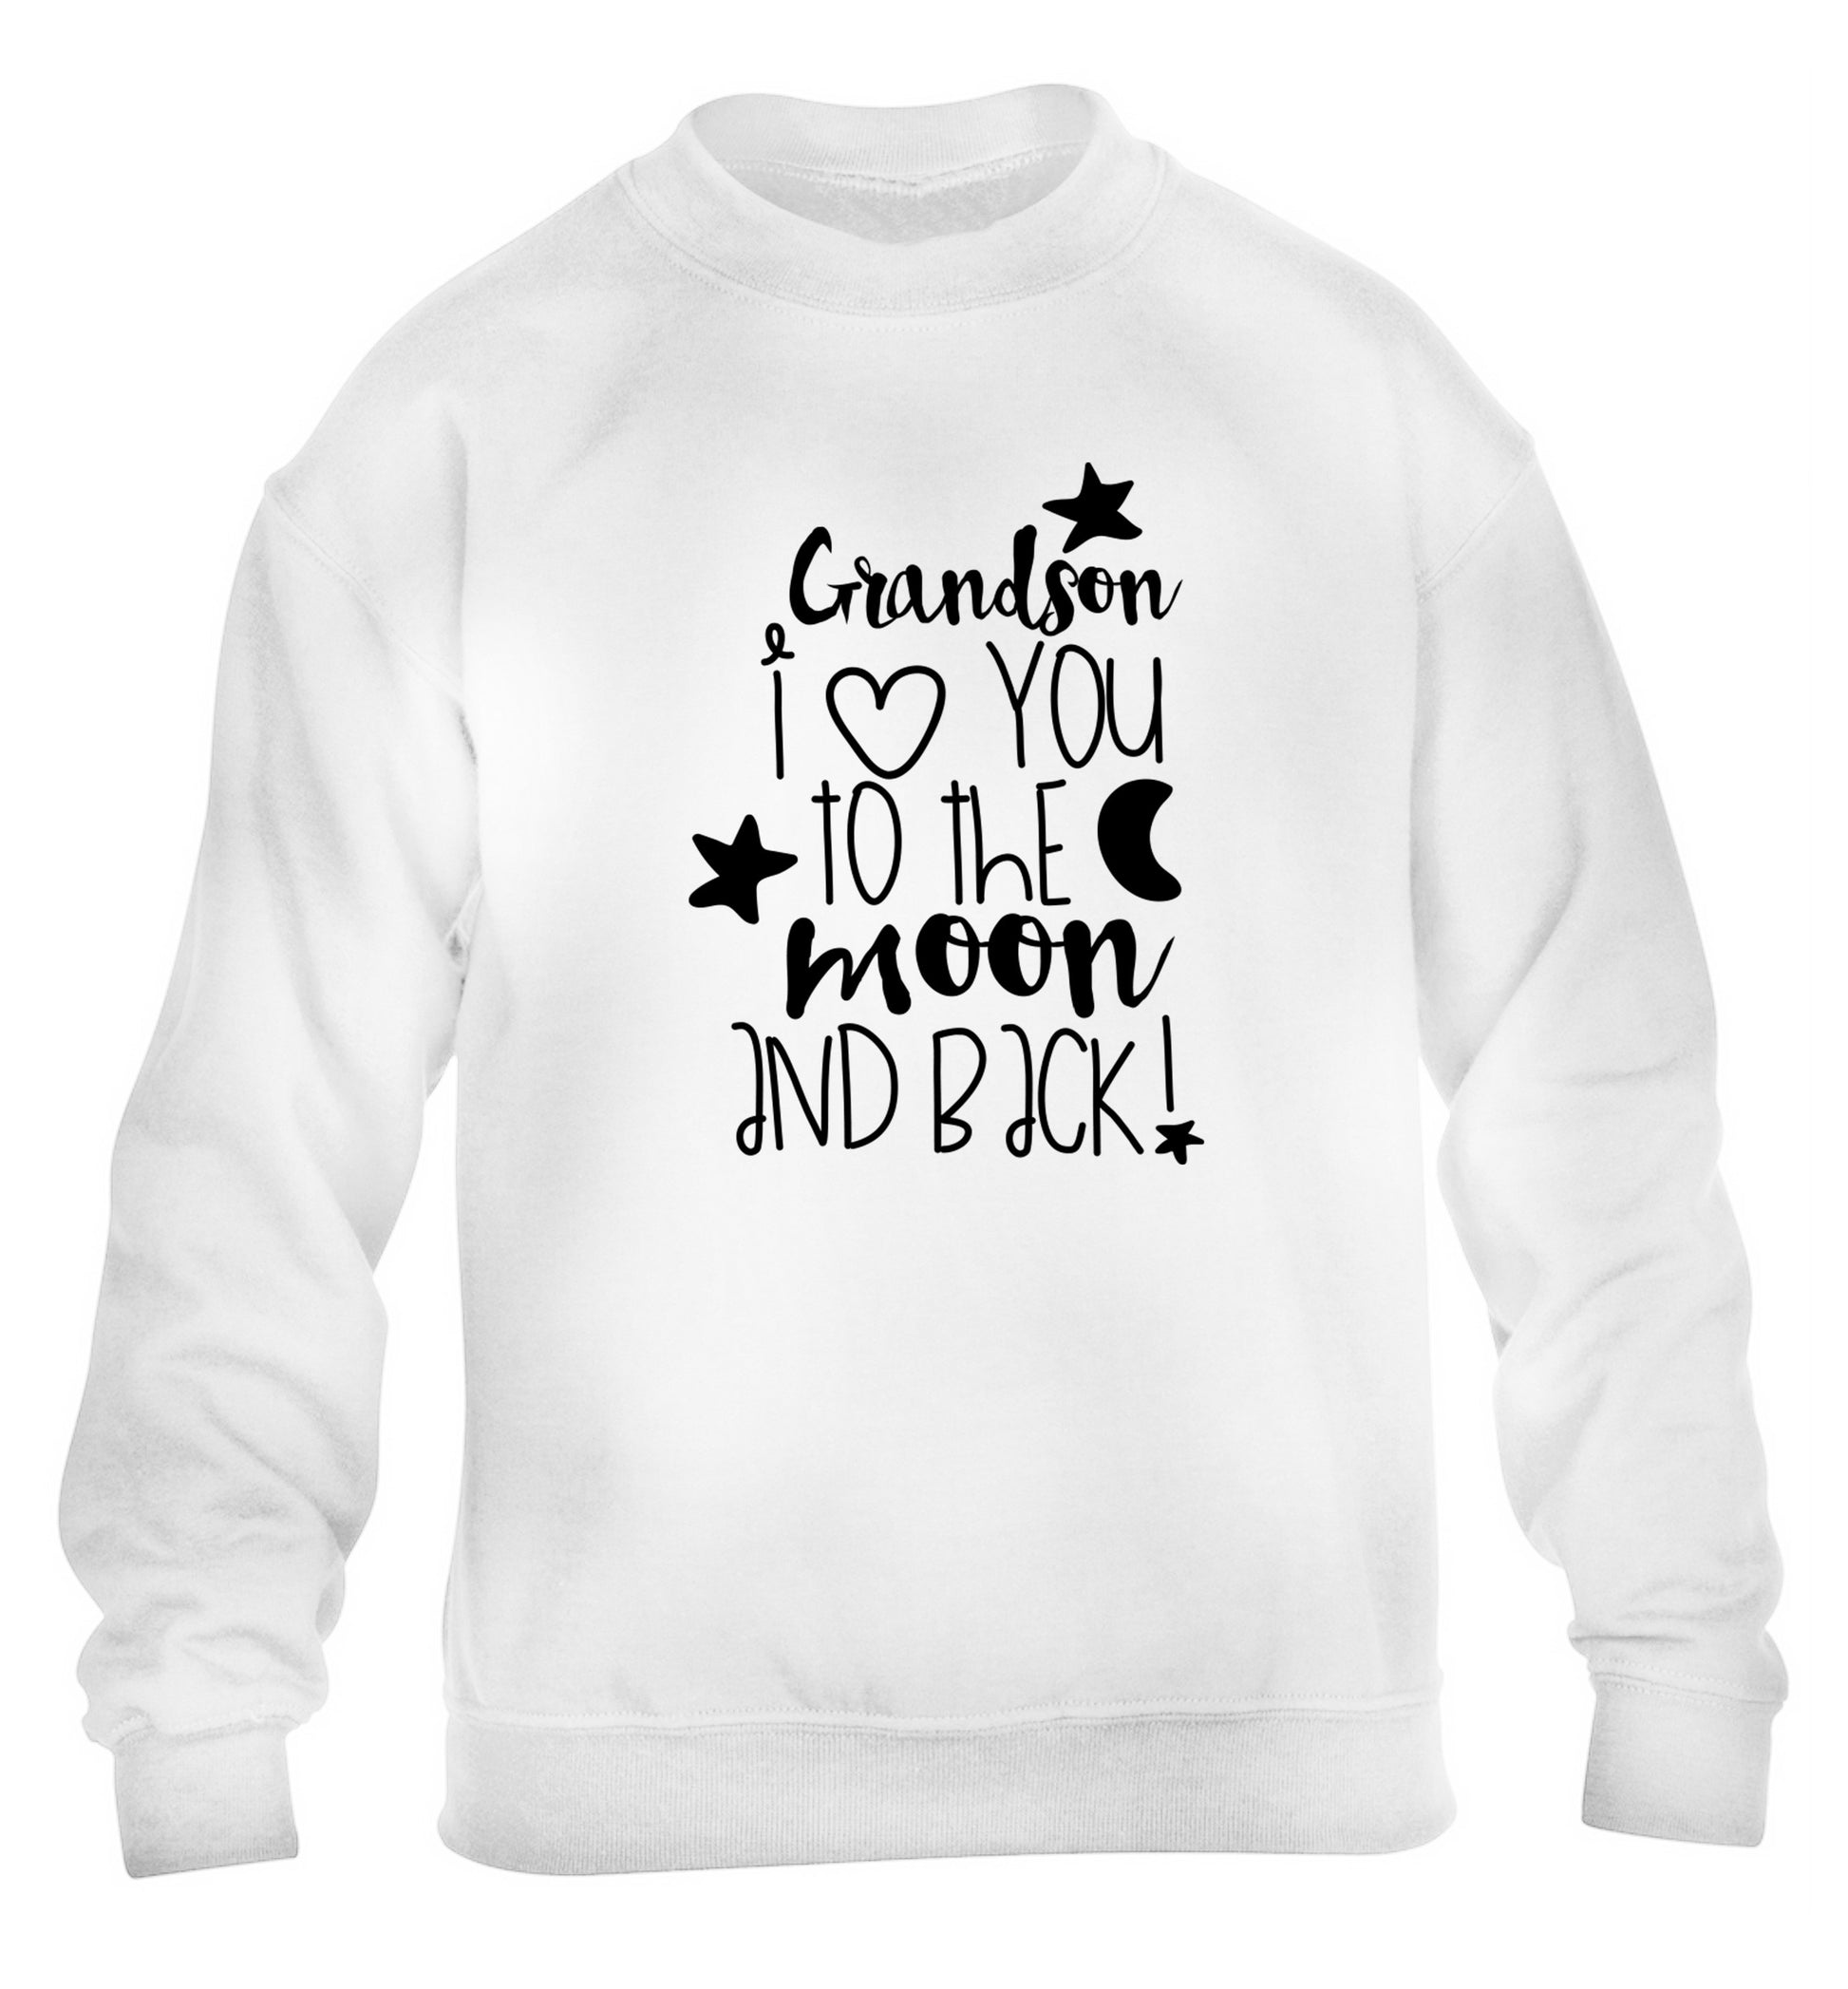 Grandson I love you to the moon and back children's white  sweater 12-14 Years